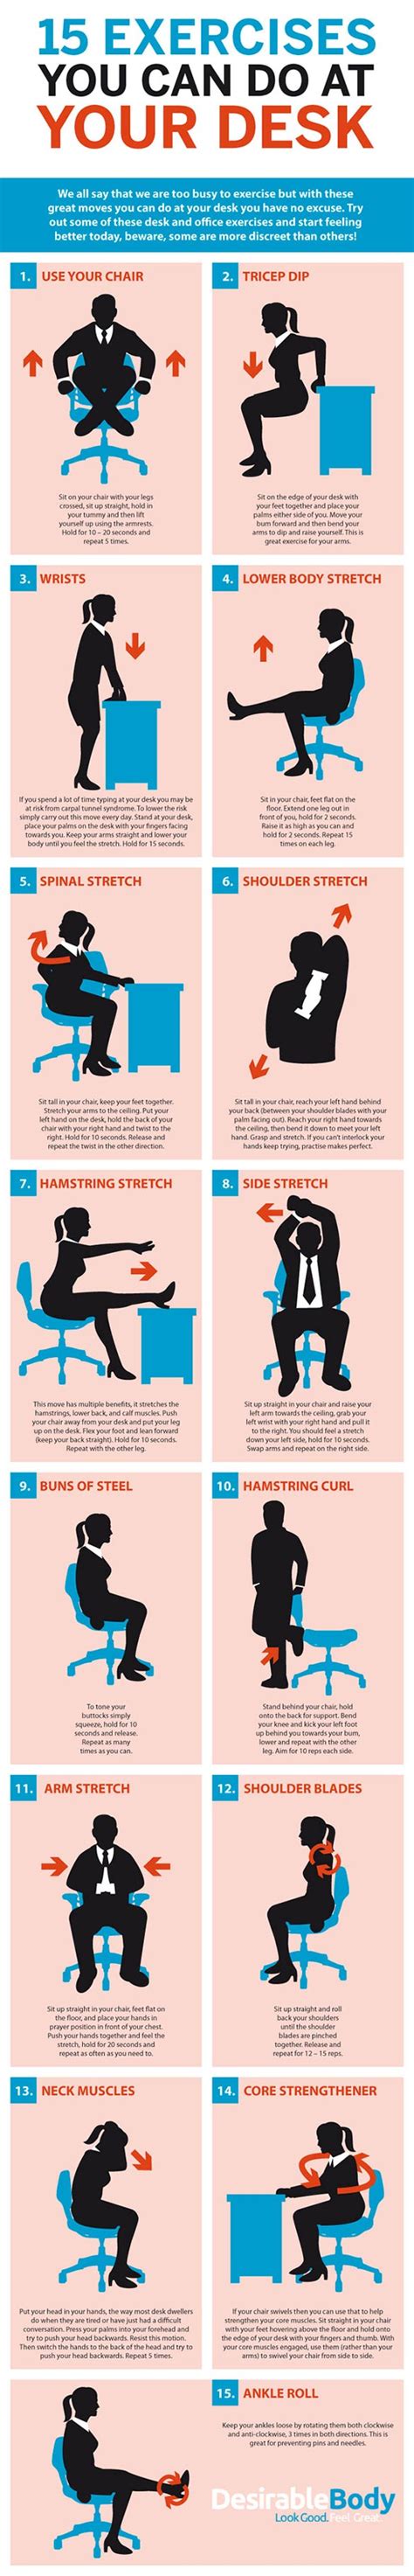 15 Exercises You Can Do At Your Desk